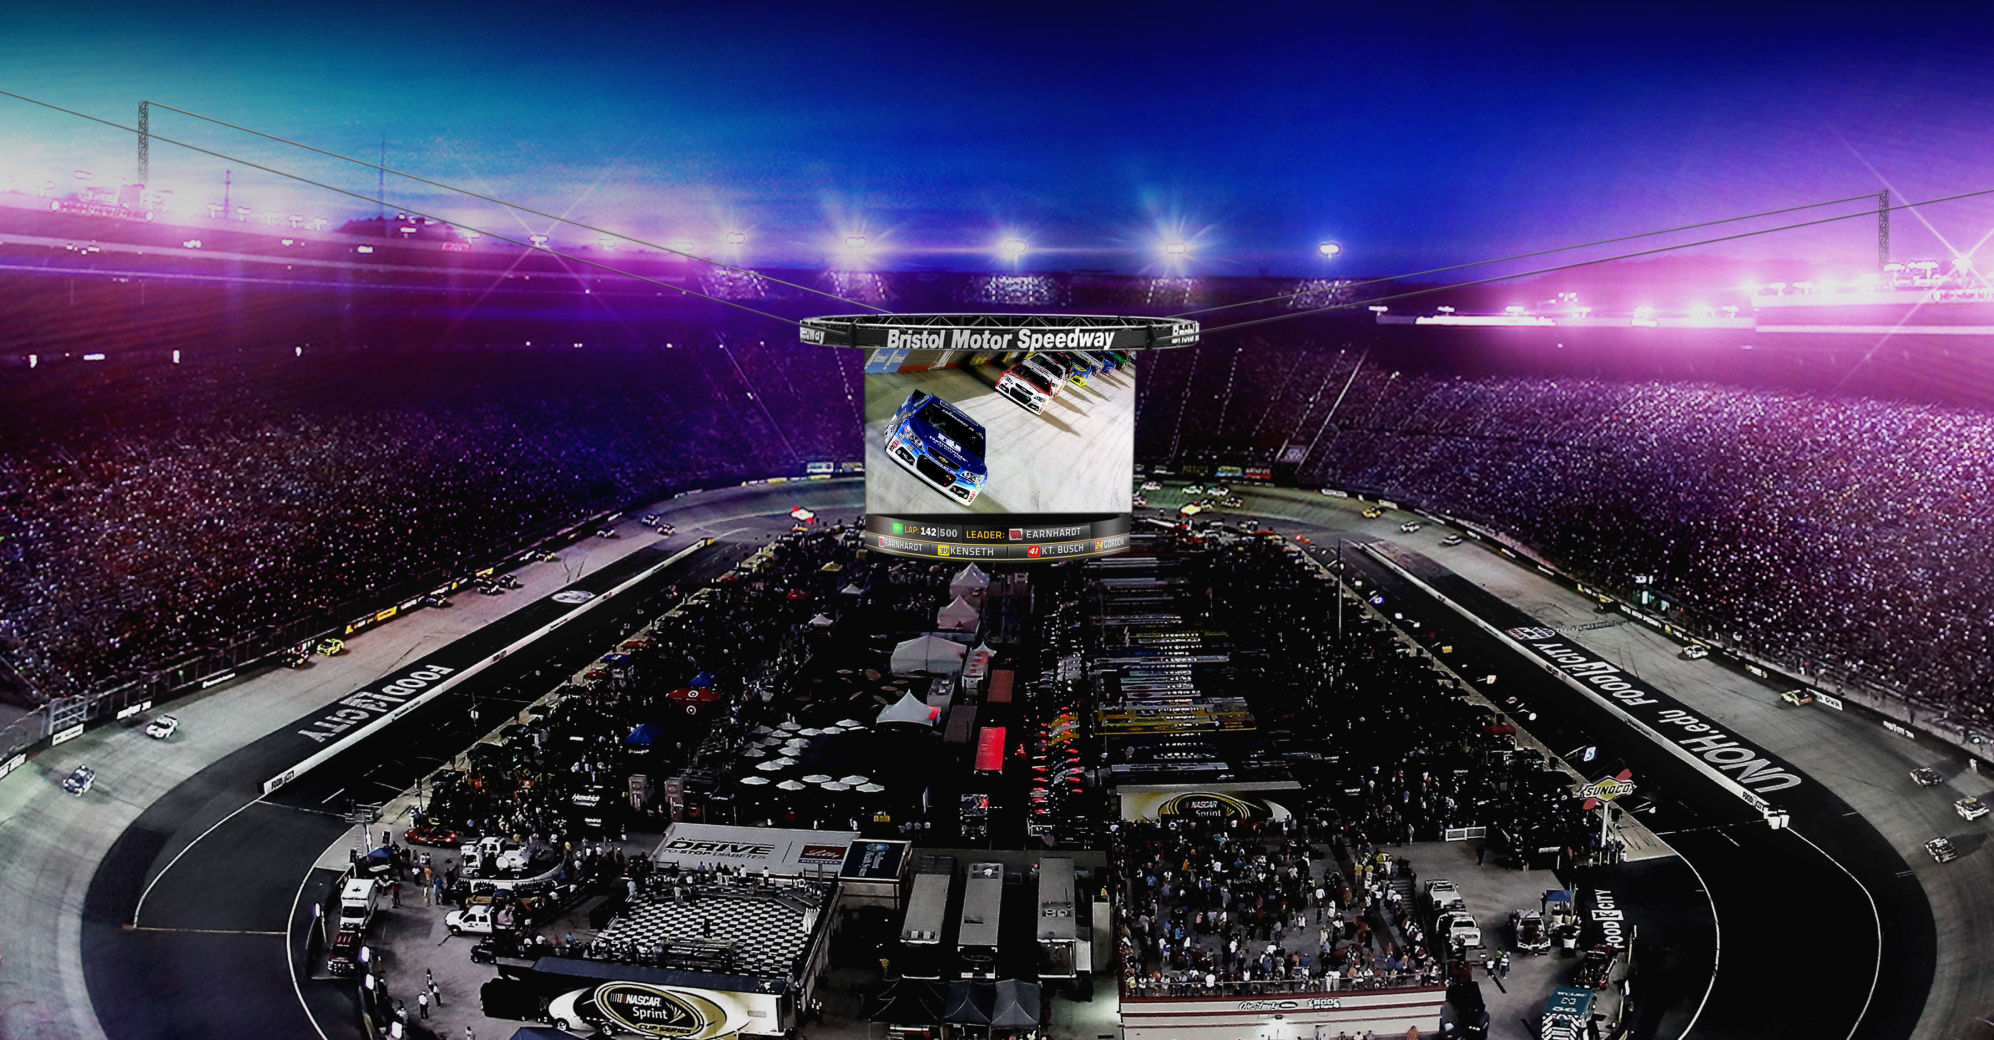 Largest outdoor, center-hung screen display in the world coming to Bristol Motor Speedway Business timesnews